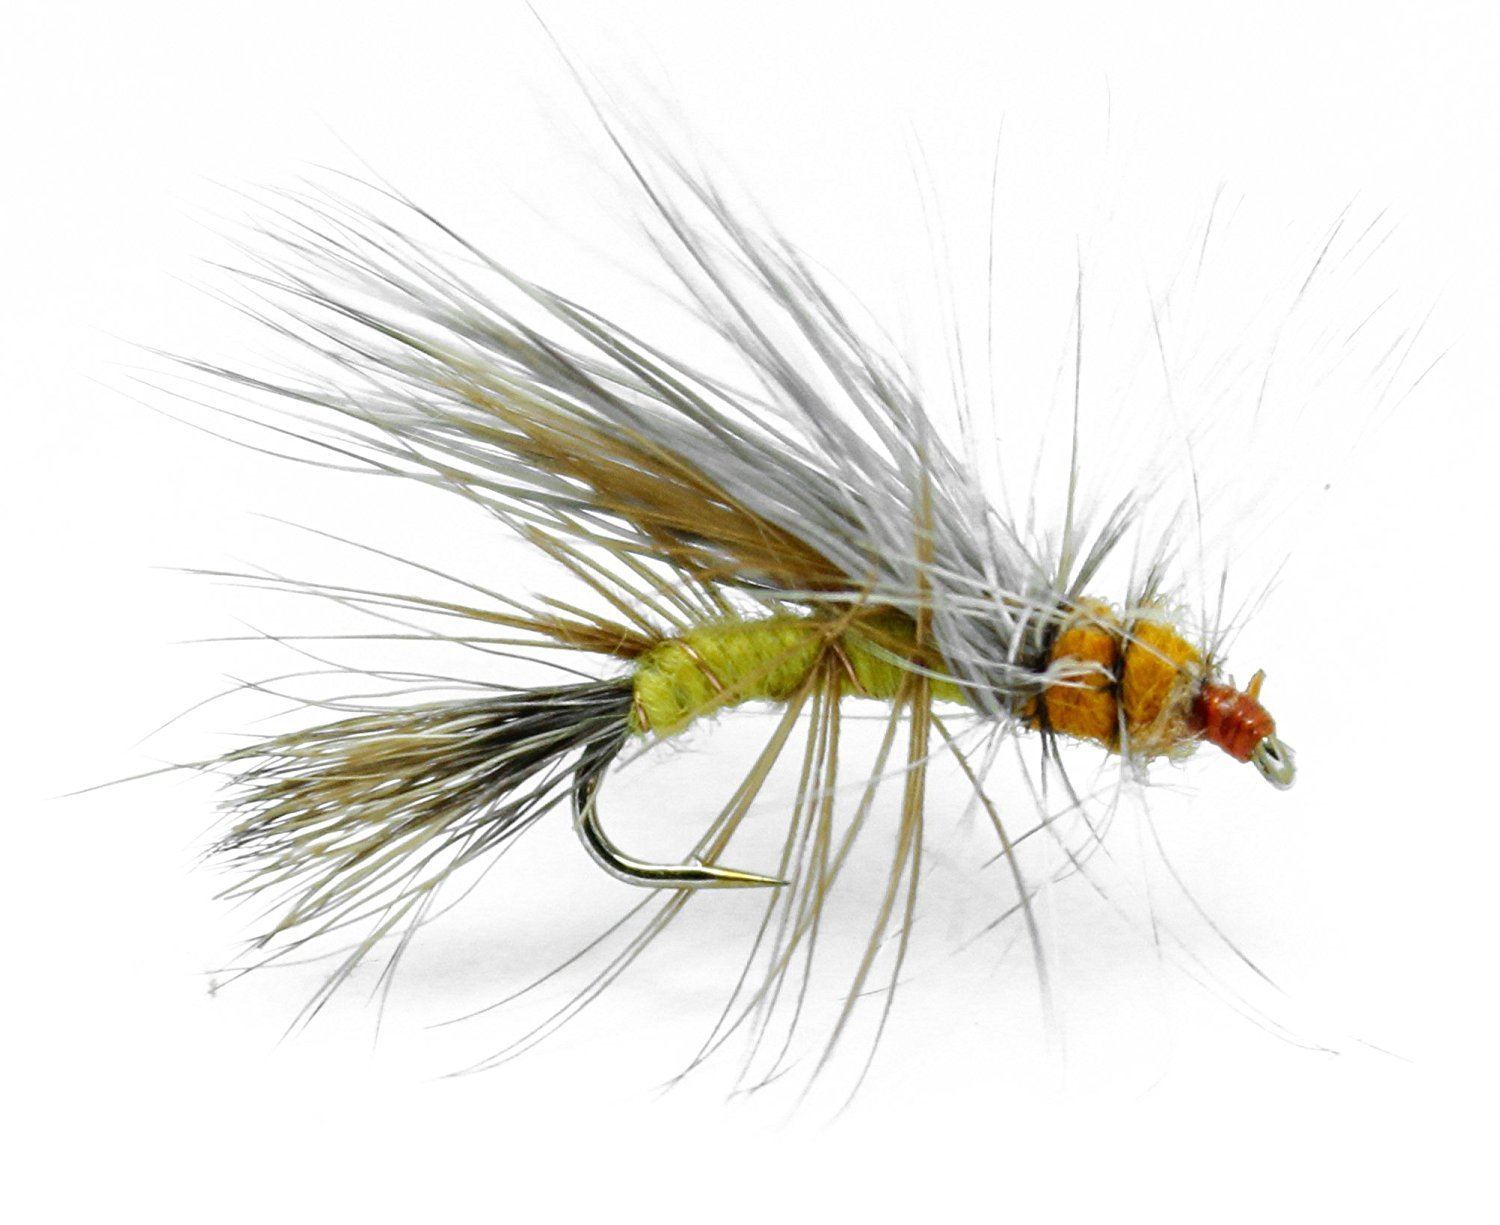 Feeder Creek Fly Fishing Assortment Stimulator Dry Flies for Trout and Other Freshwater Fish - 36 Hand Tied Flies in Sizes 12,14,16 (3 of Each Size)